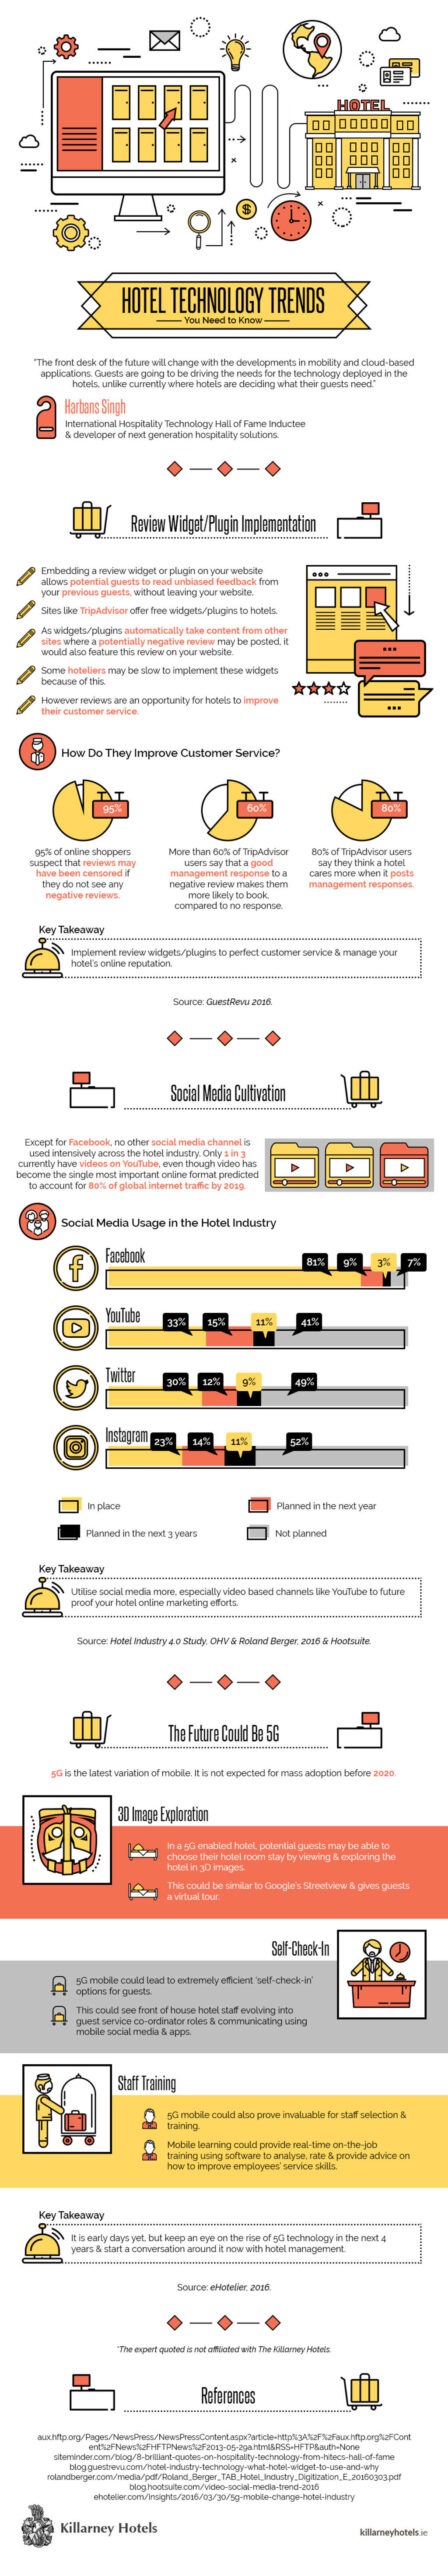 hotel-technology-trends-infographic